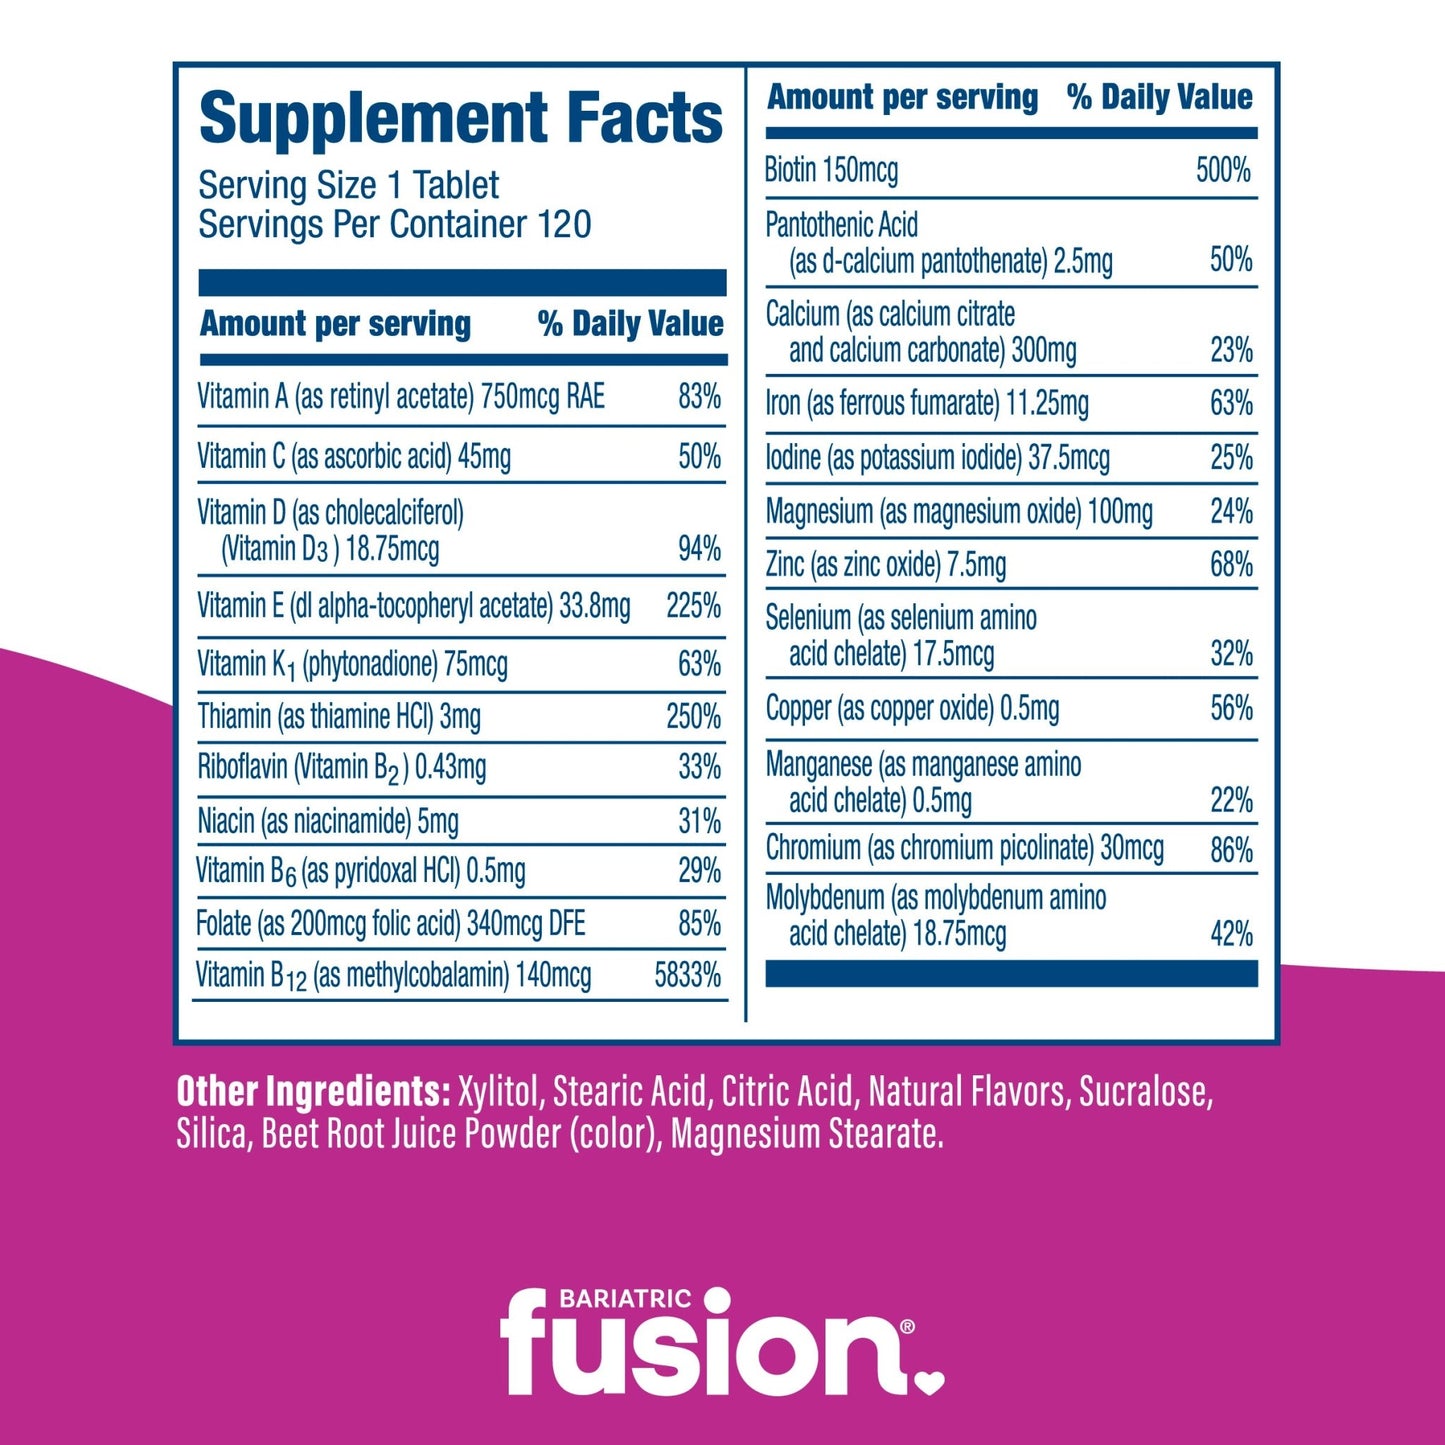 Bariatric Fusion Mixed Berry Complete Chewable Bariatric Multivitamin ADEK supplement facts.